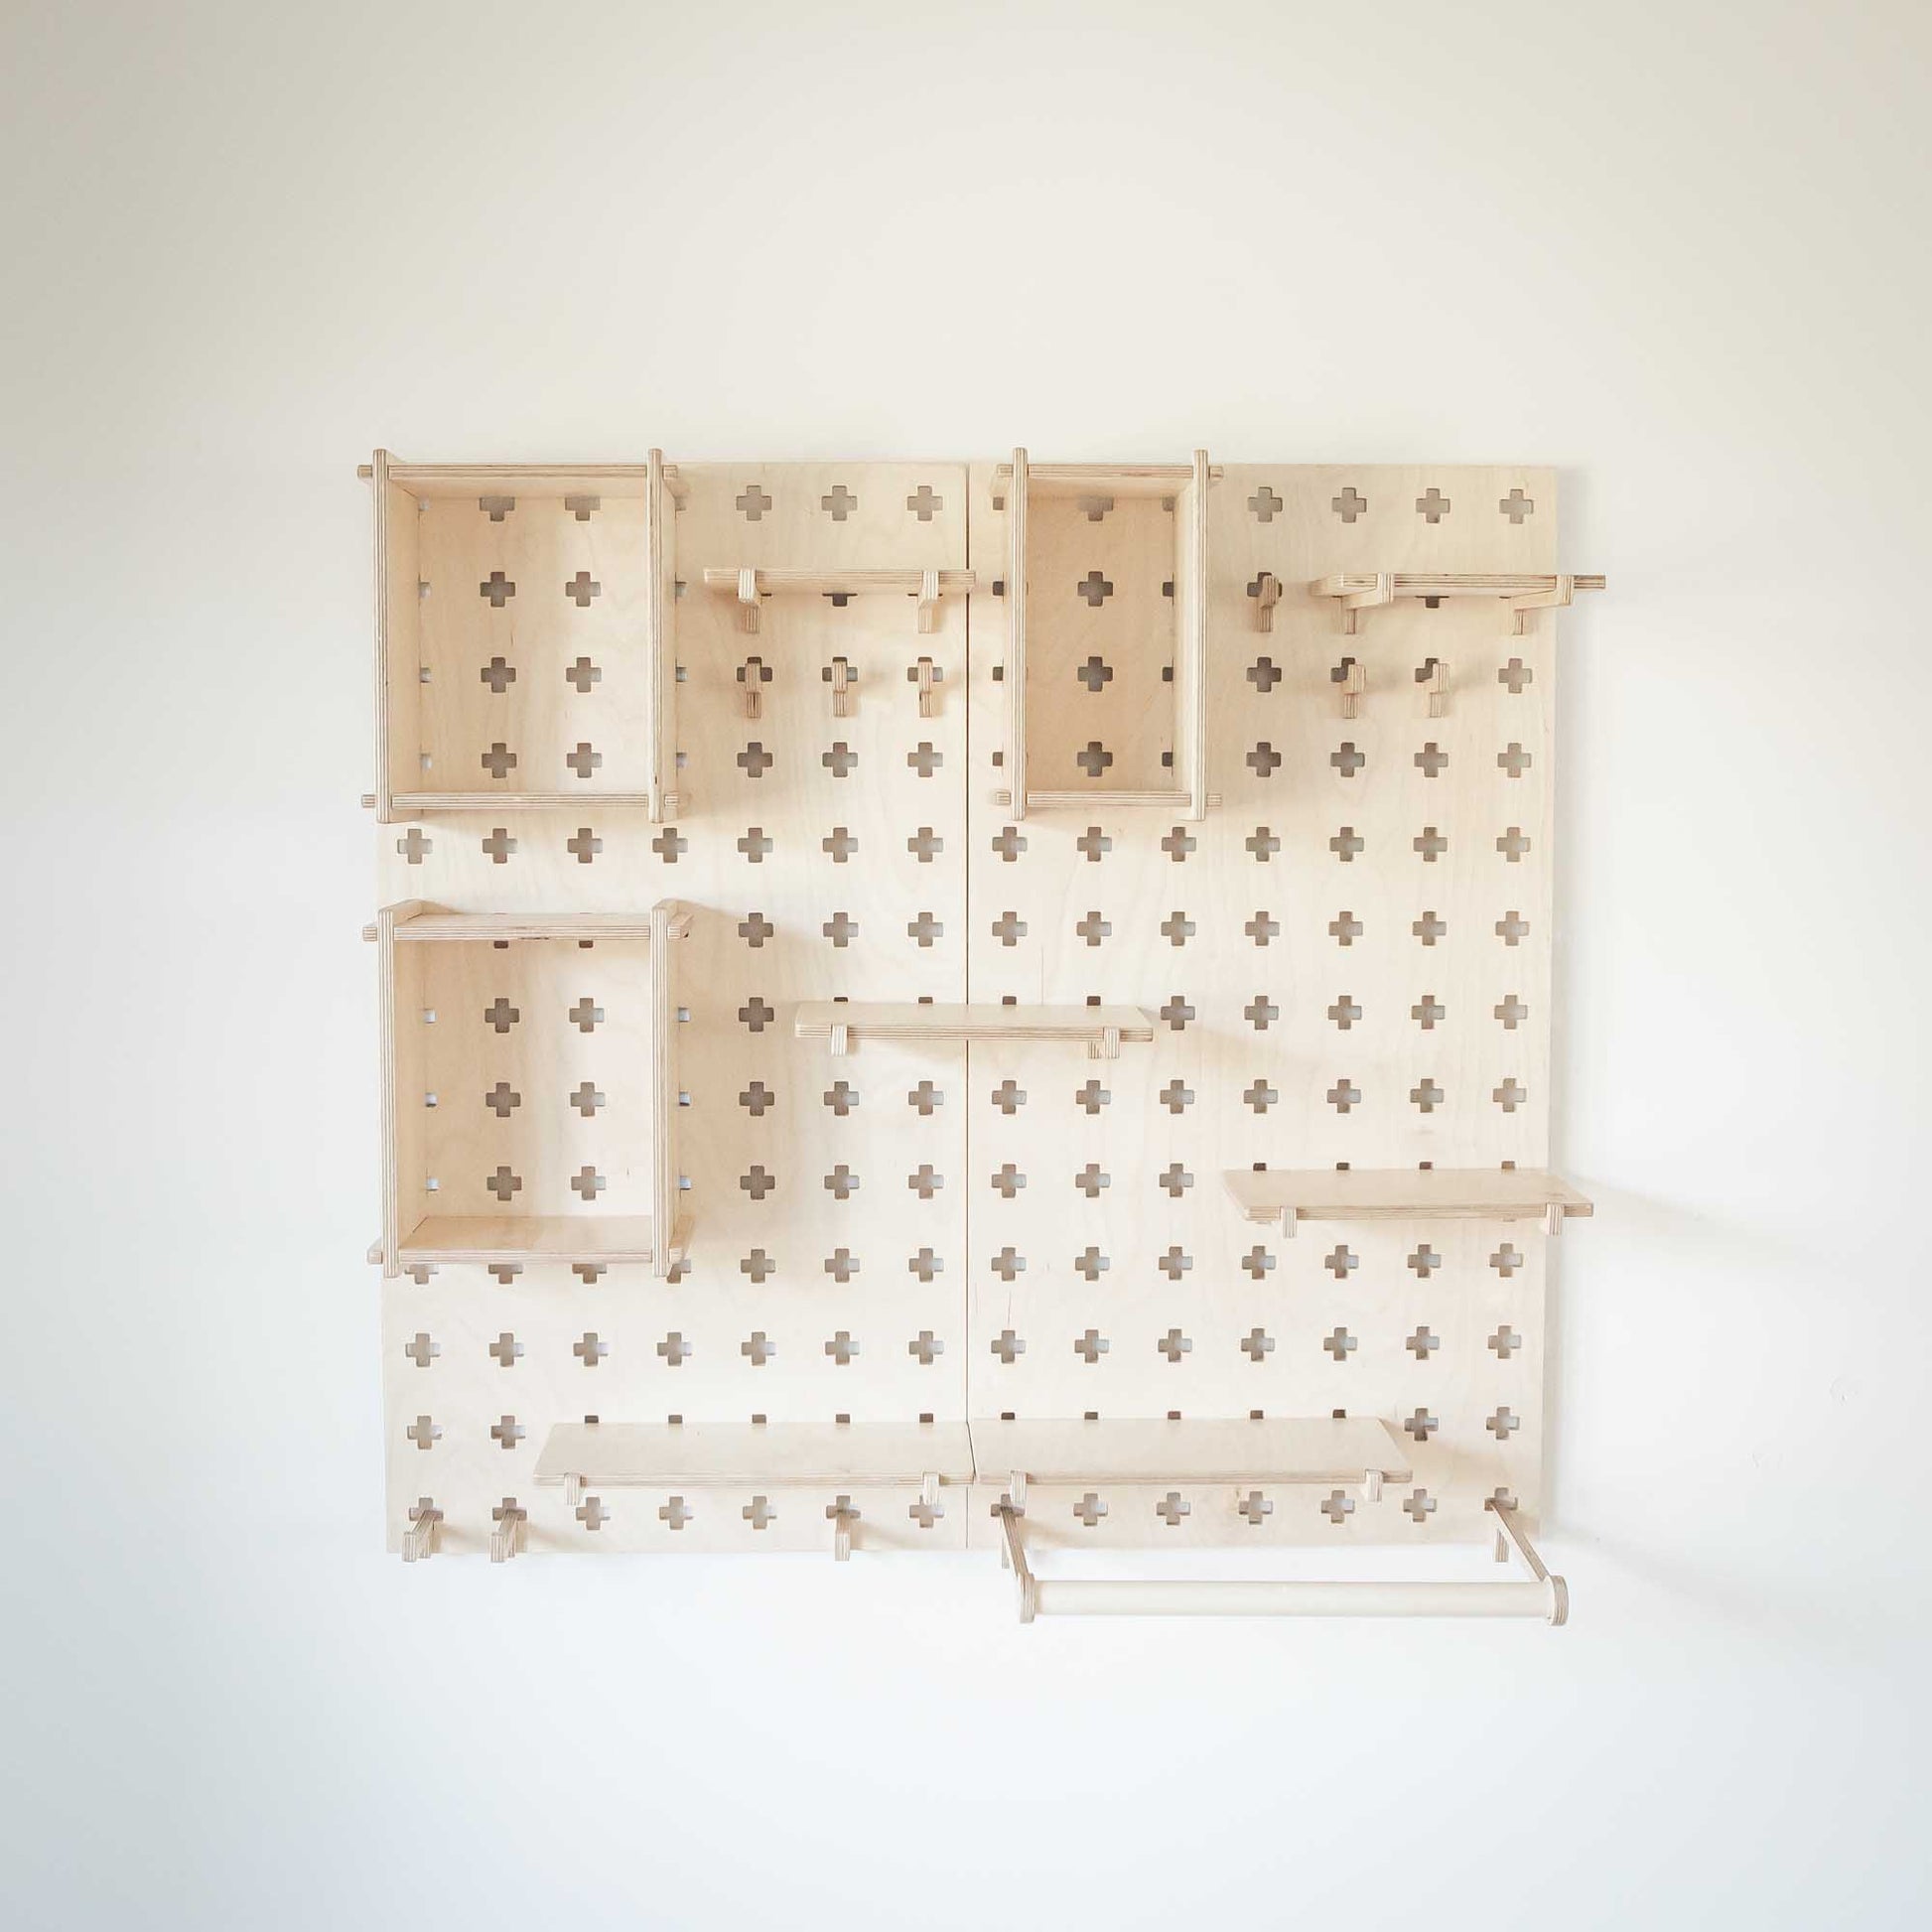 A Sweet HOME from wood Large Pegboard Shelf with Clothes Hanger for open storage shelves.